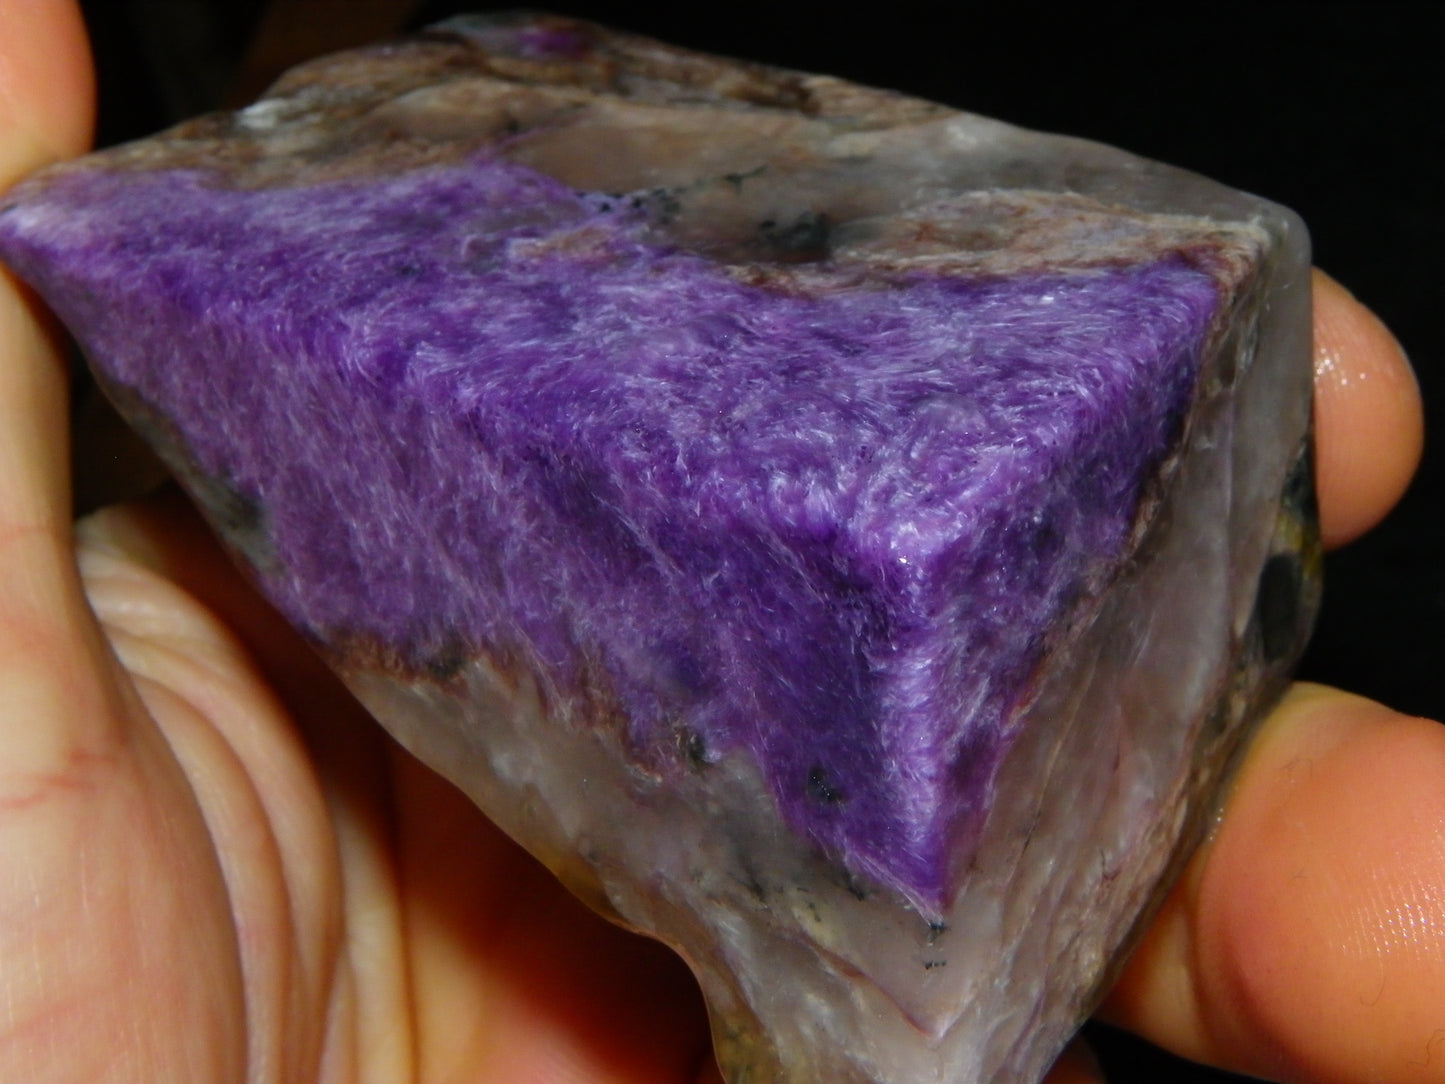 2 Nice Large Rough/Sliced/Coated Charoite Specimens 1044cts Purple/Silver Host Rock :)